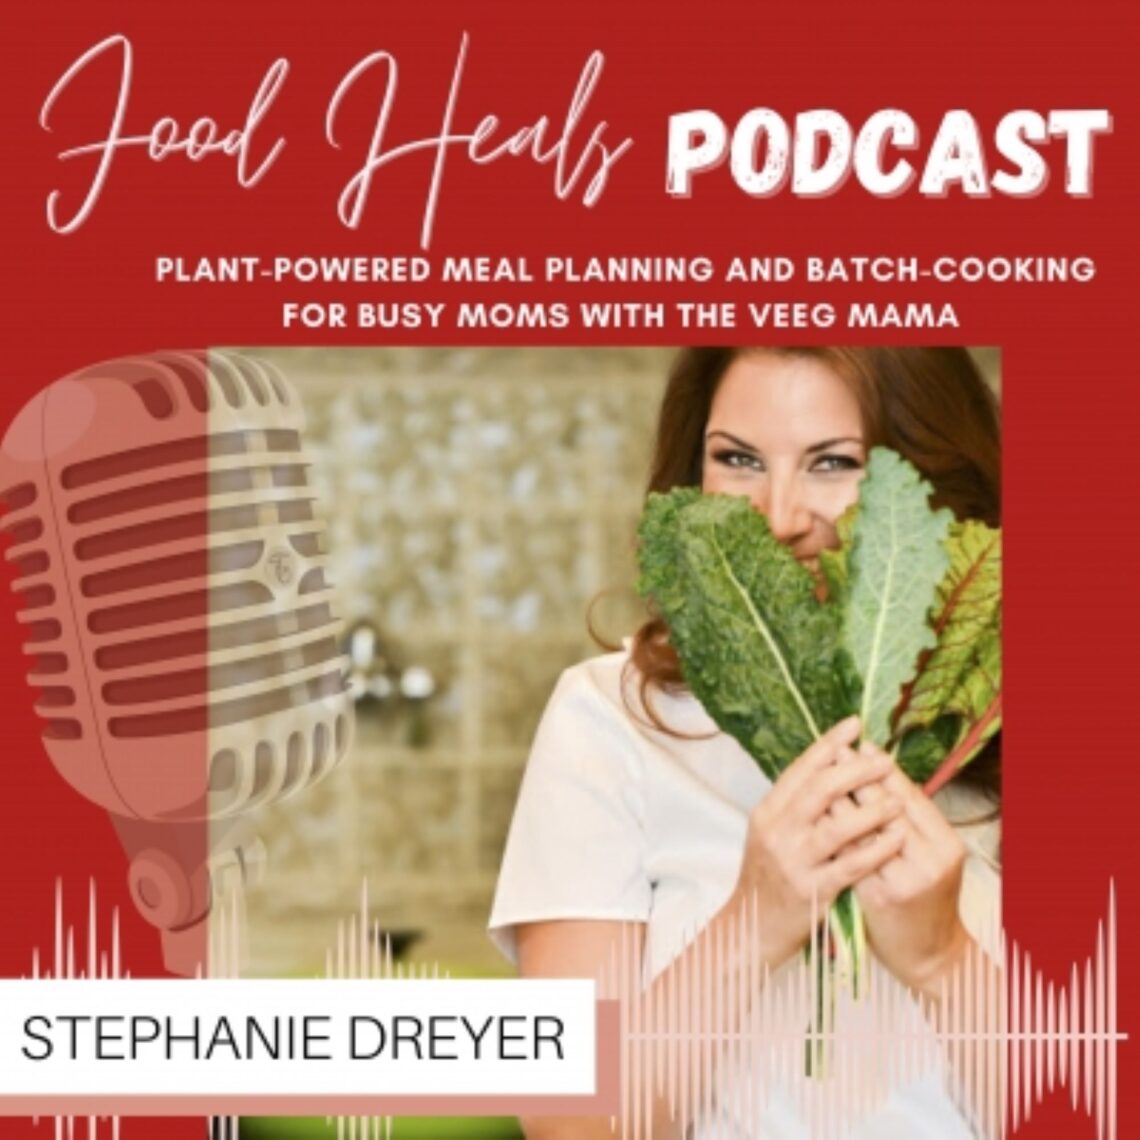 Plant-Powered Meal Planning and Batch-Cooking for Busy Moms with Veeg Mama’s Stephanie Dreyer